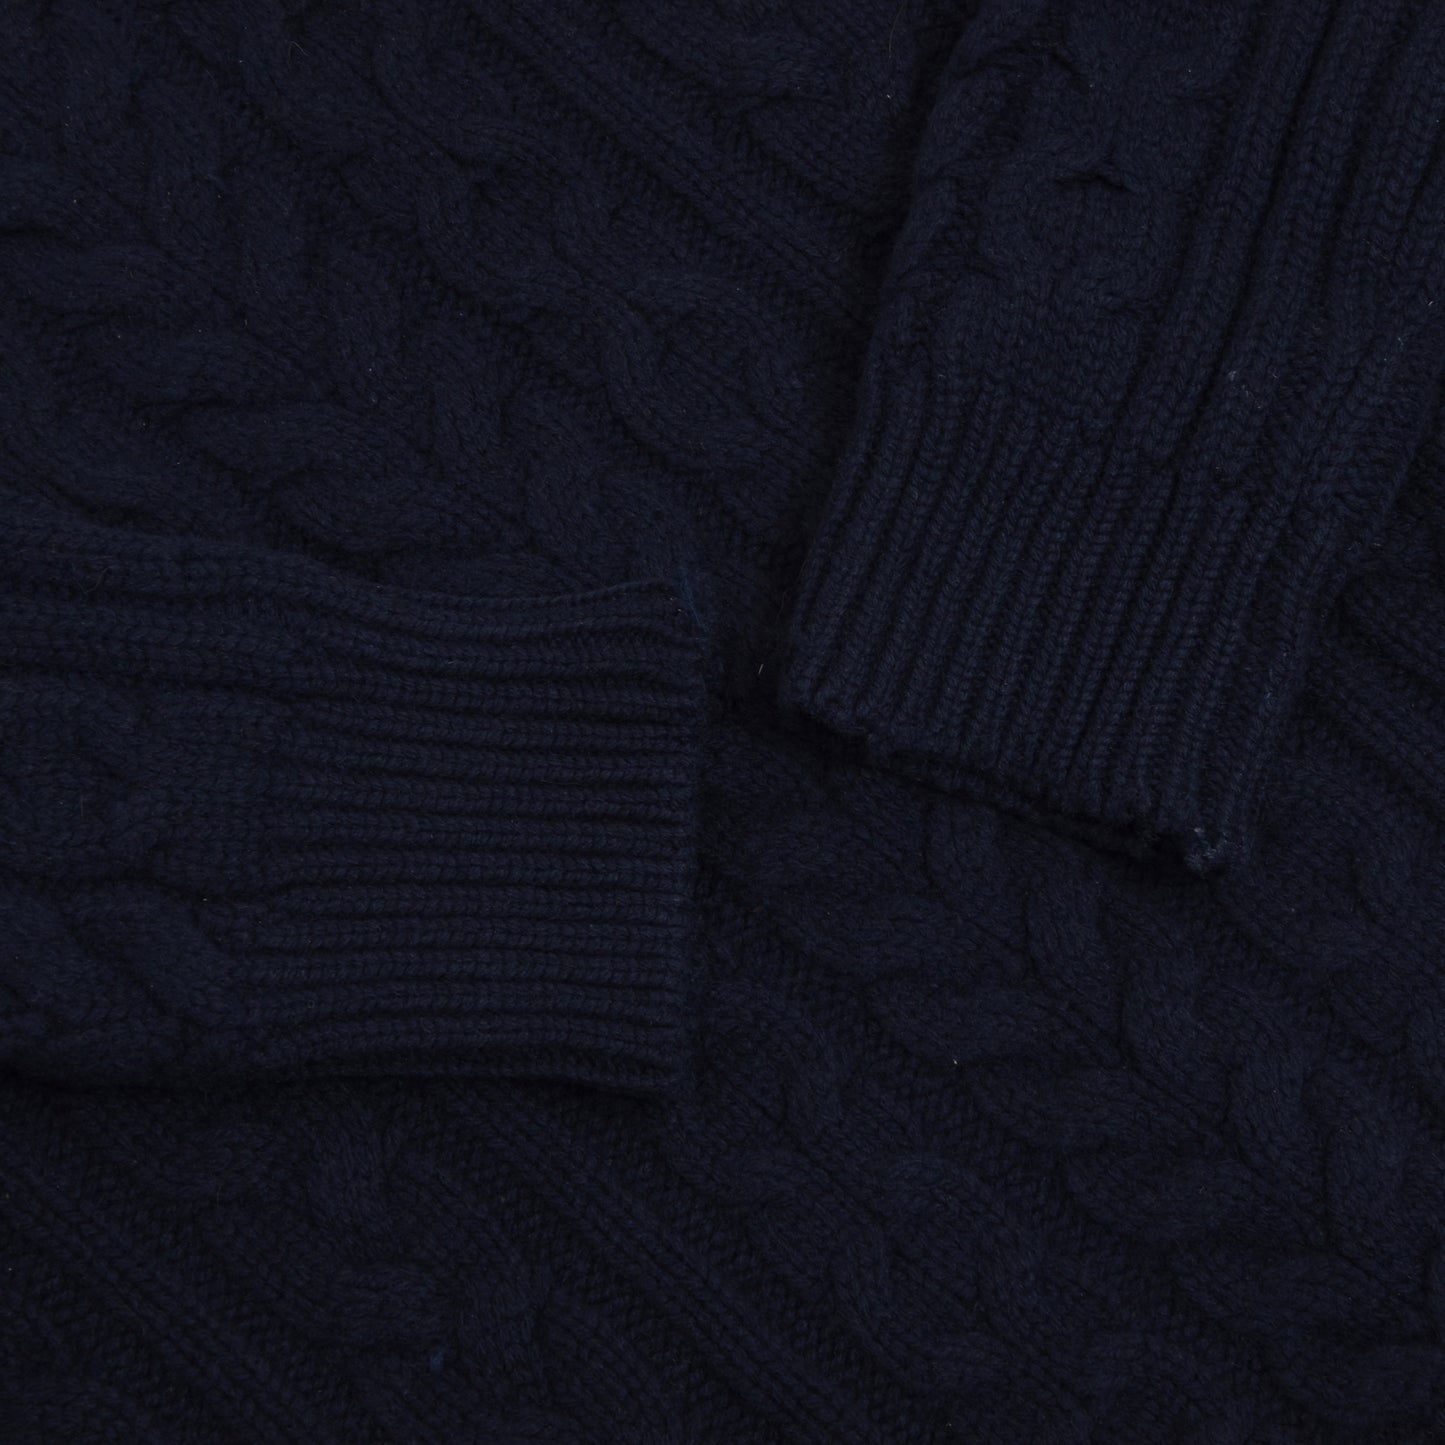 Suitsupply Wool/Cashmere Cableknit Sweater Size XXL - Navy Blue